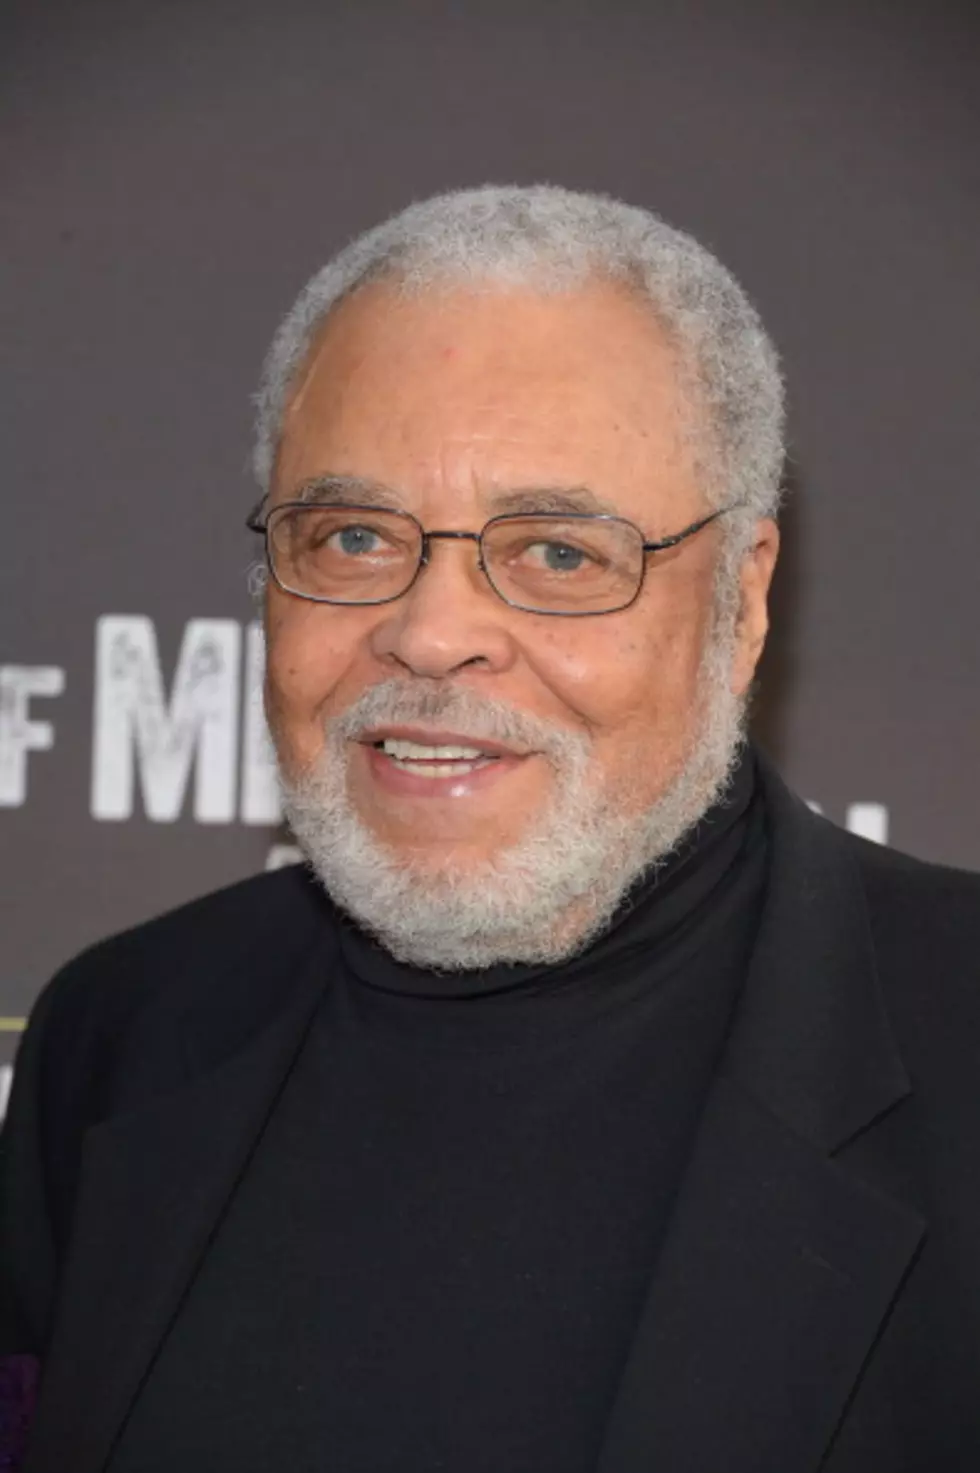 James Earl Jones, Cicely Tyson to star together on Broadway